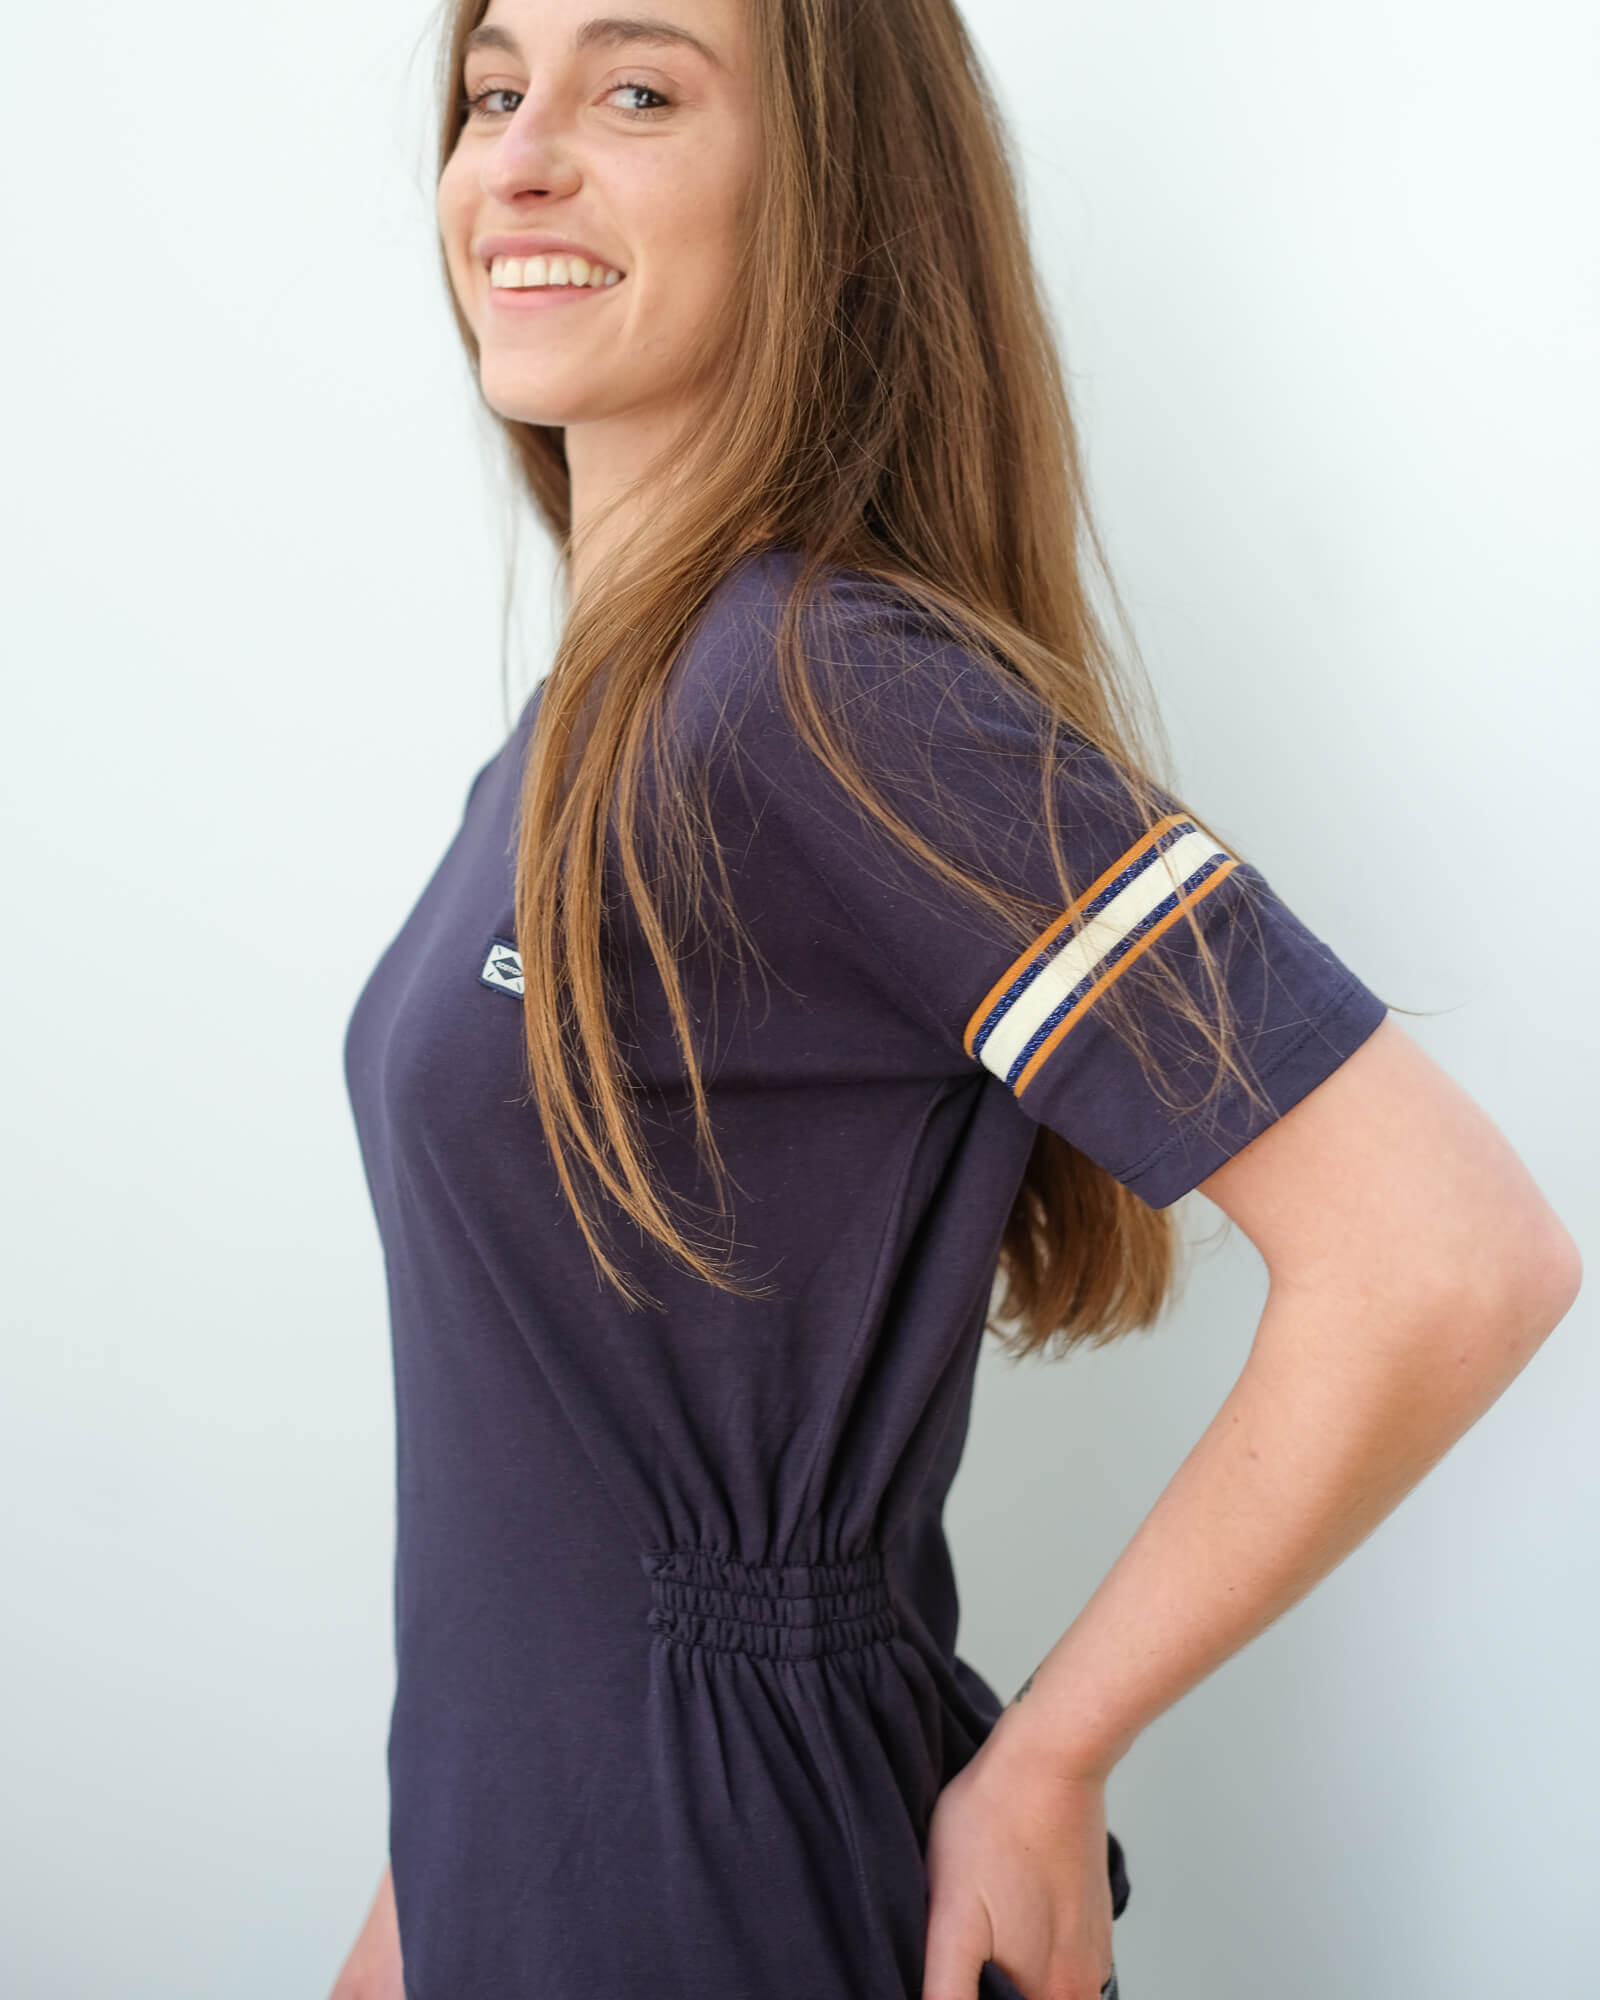 AB 151253 Soft tee with sporty rib detail in navy